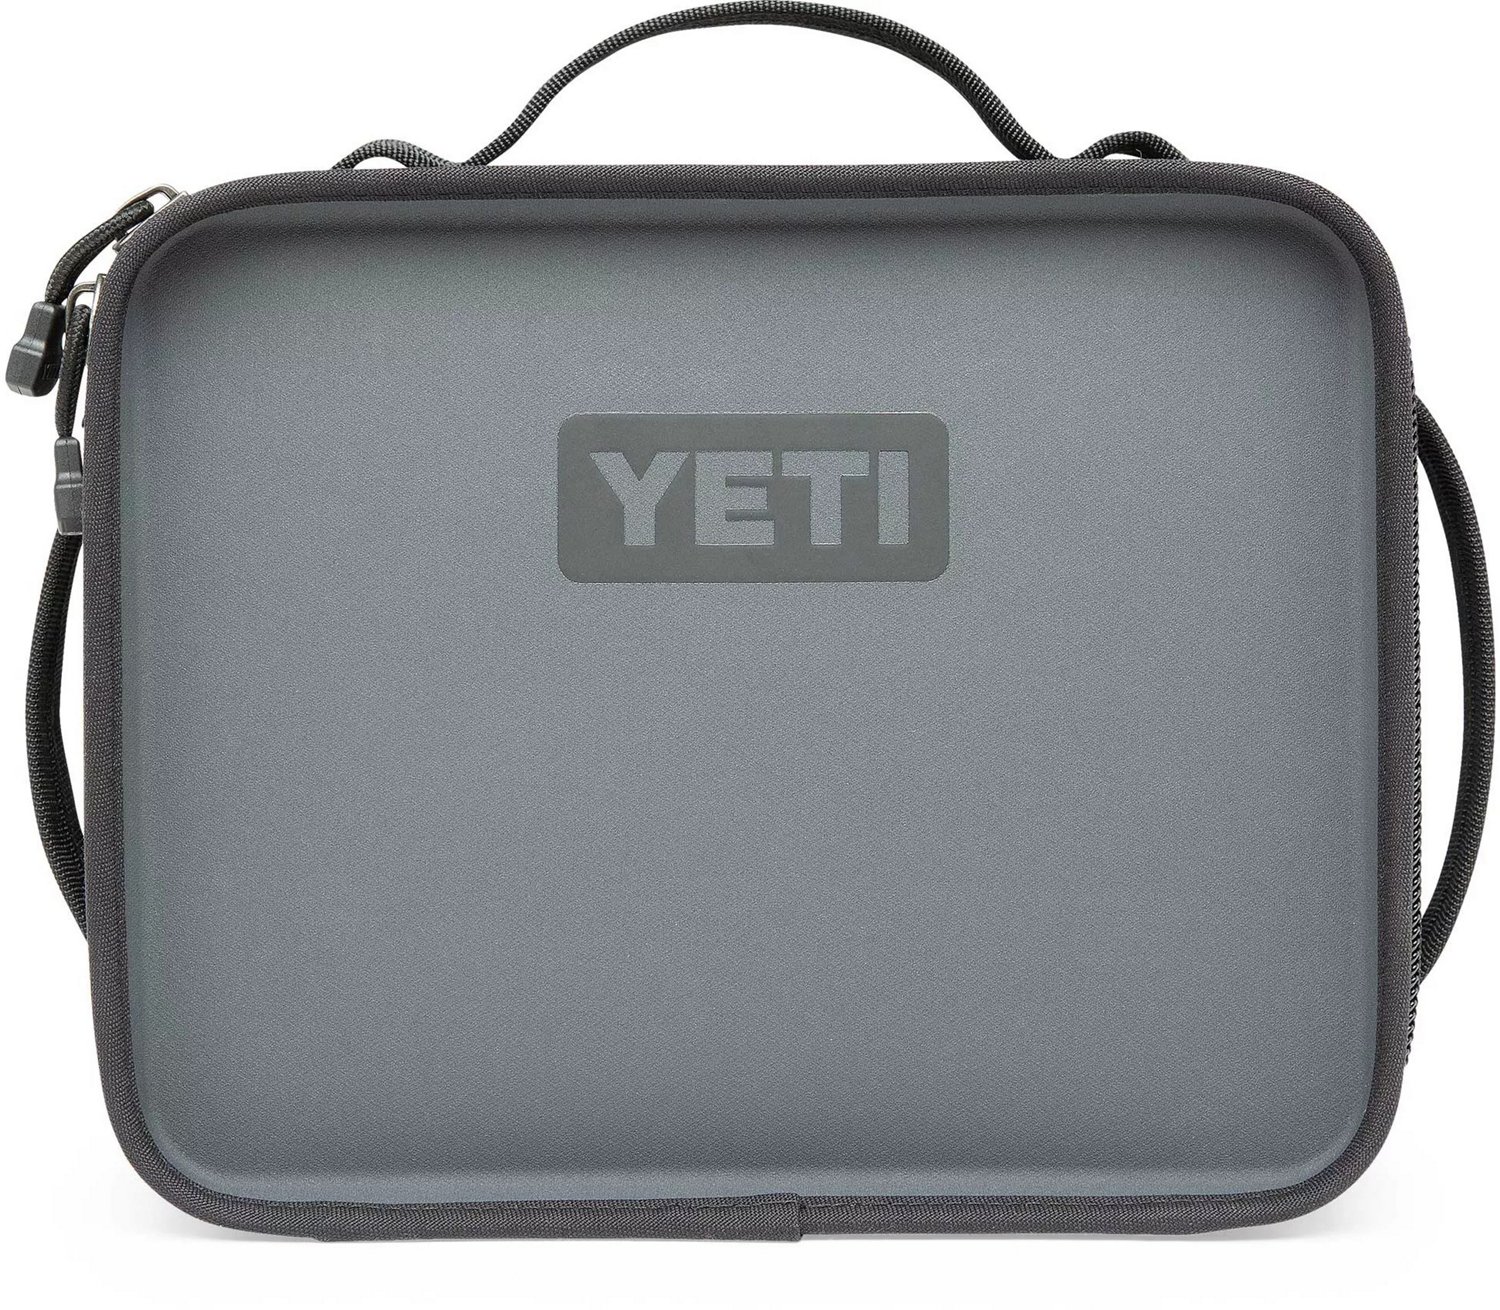 Yeti Hopper M30 20-Can Soft-Side Cooler, Charcoal - Foley Hardware